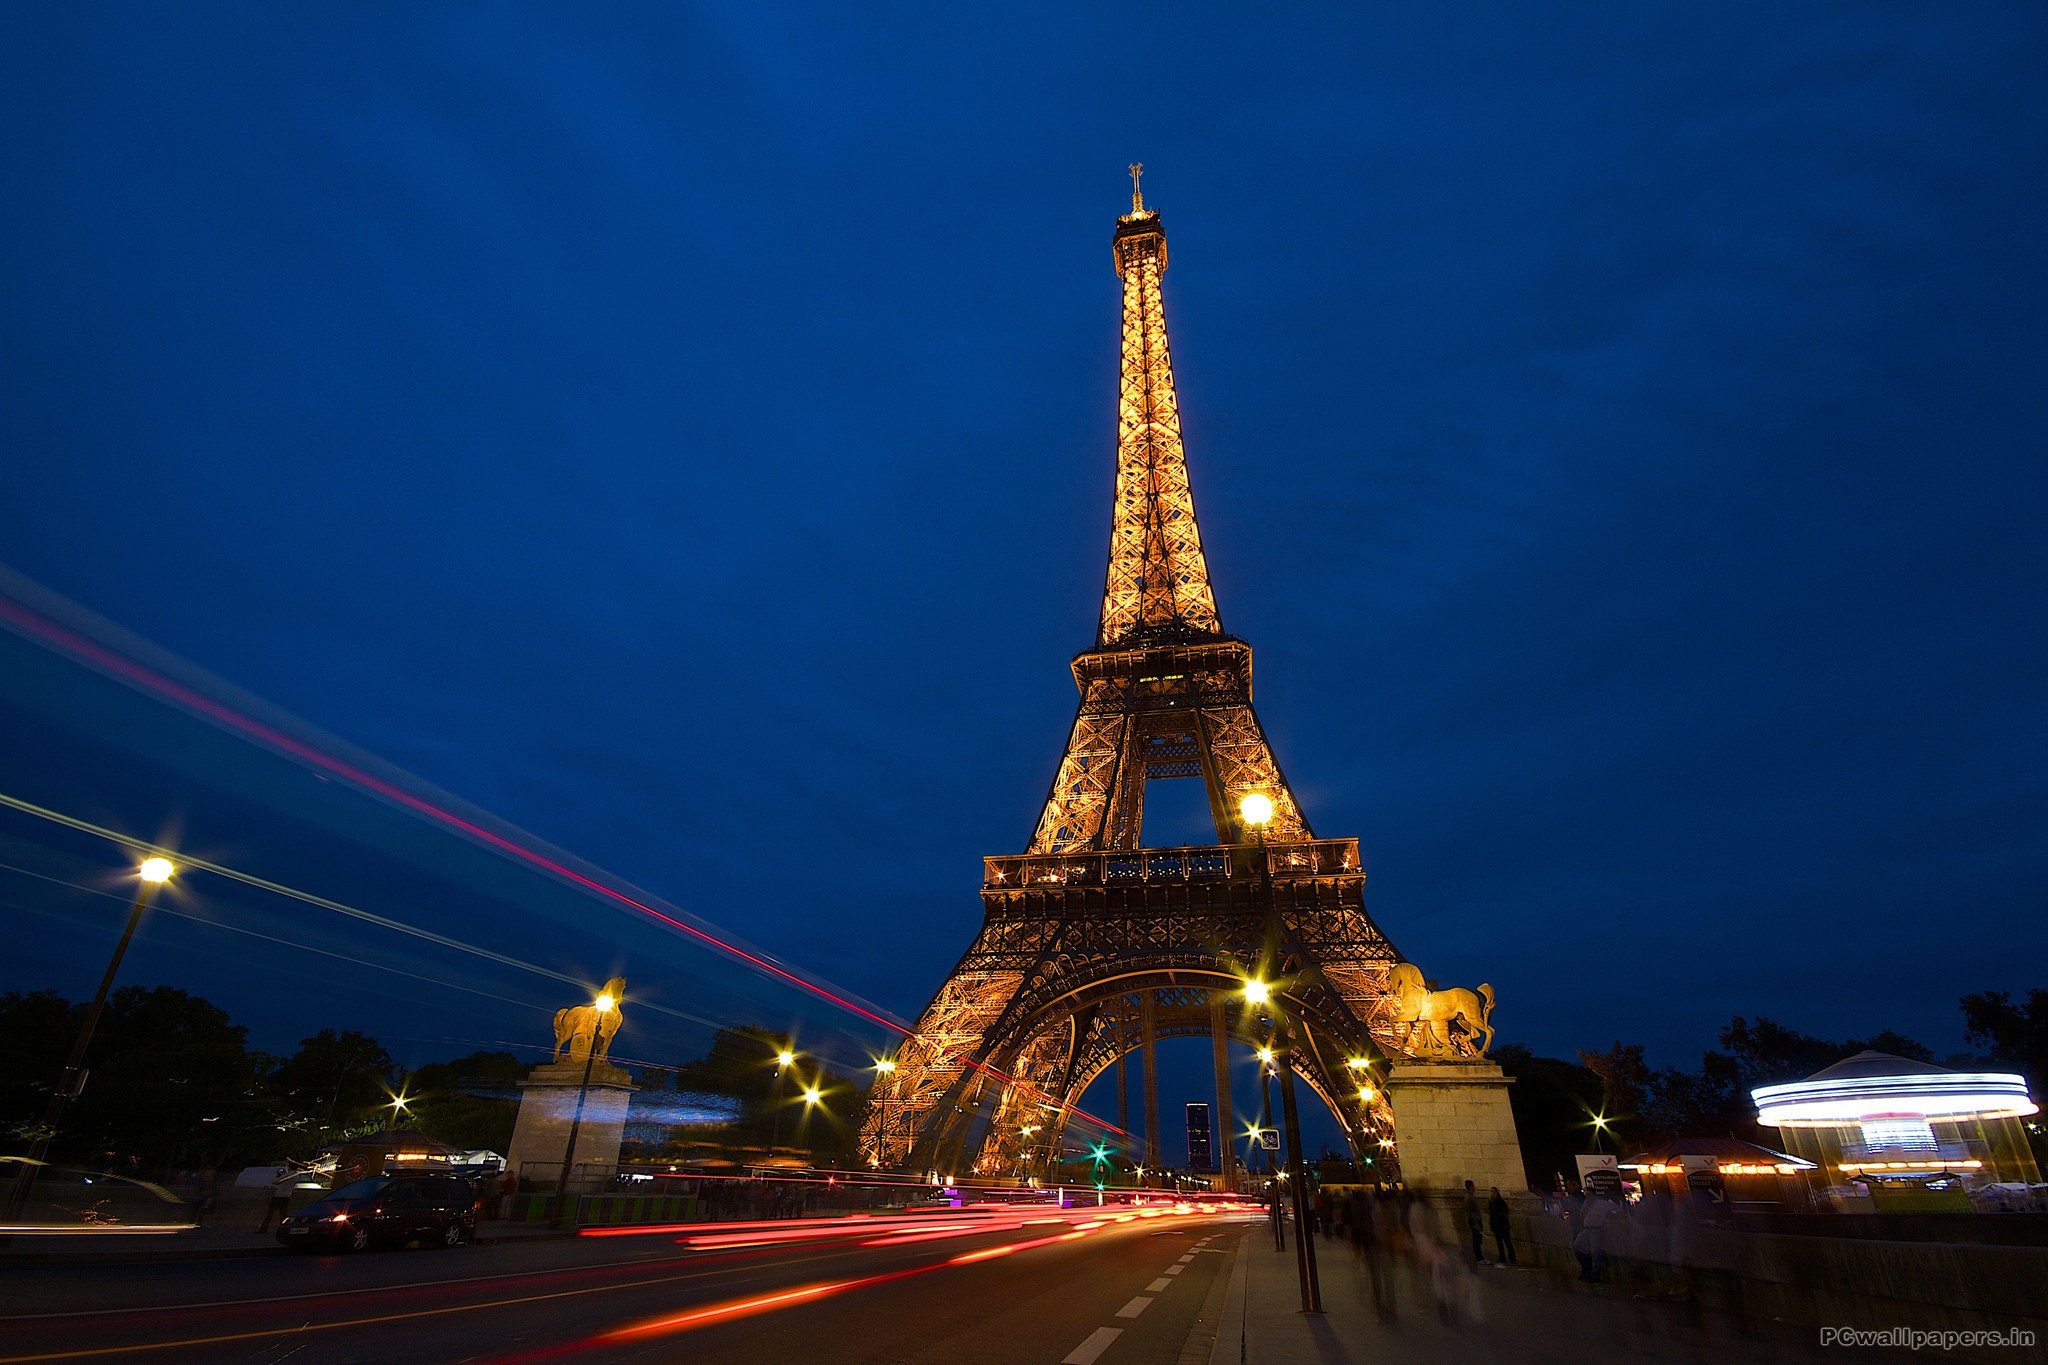 2048x1365 Wallpaper Of the Eiffel tower Amazing Eiffel tower Wallpapers at Night